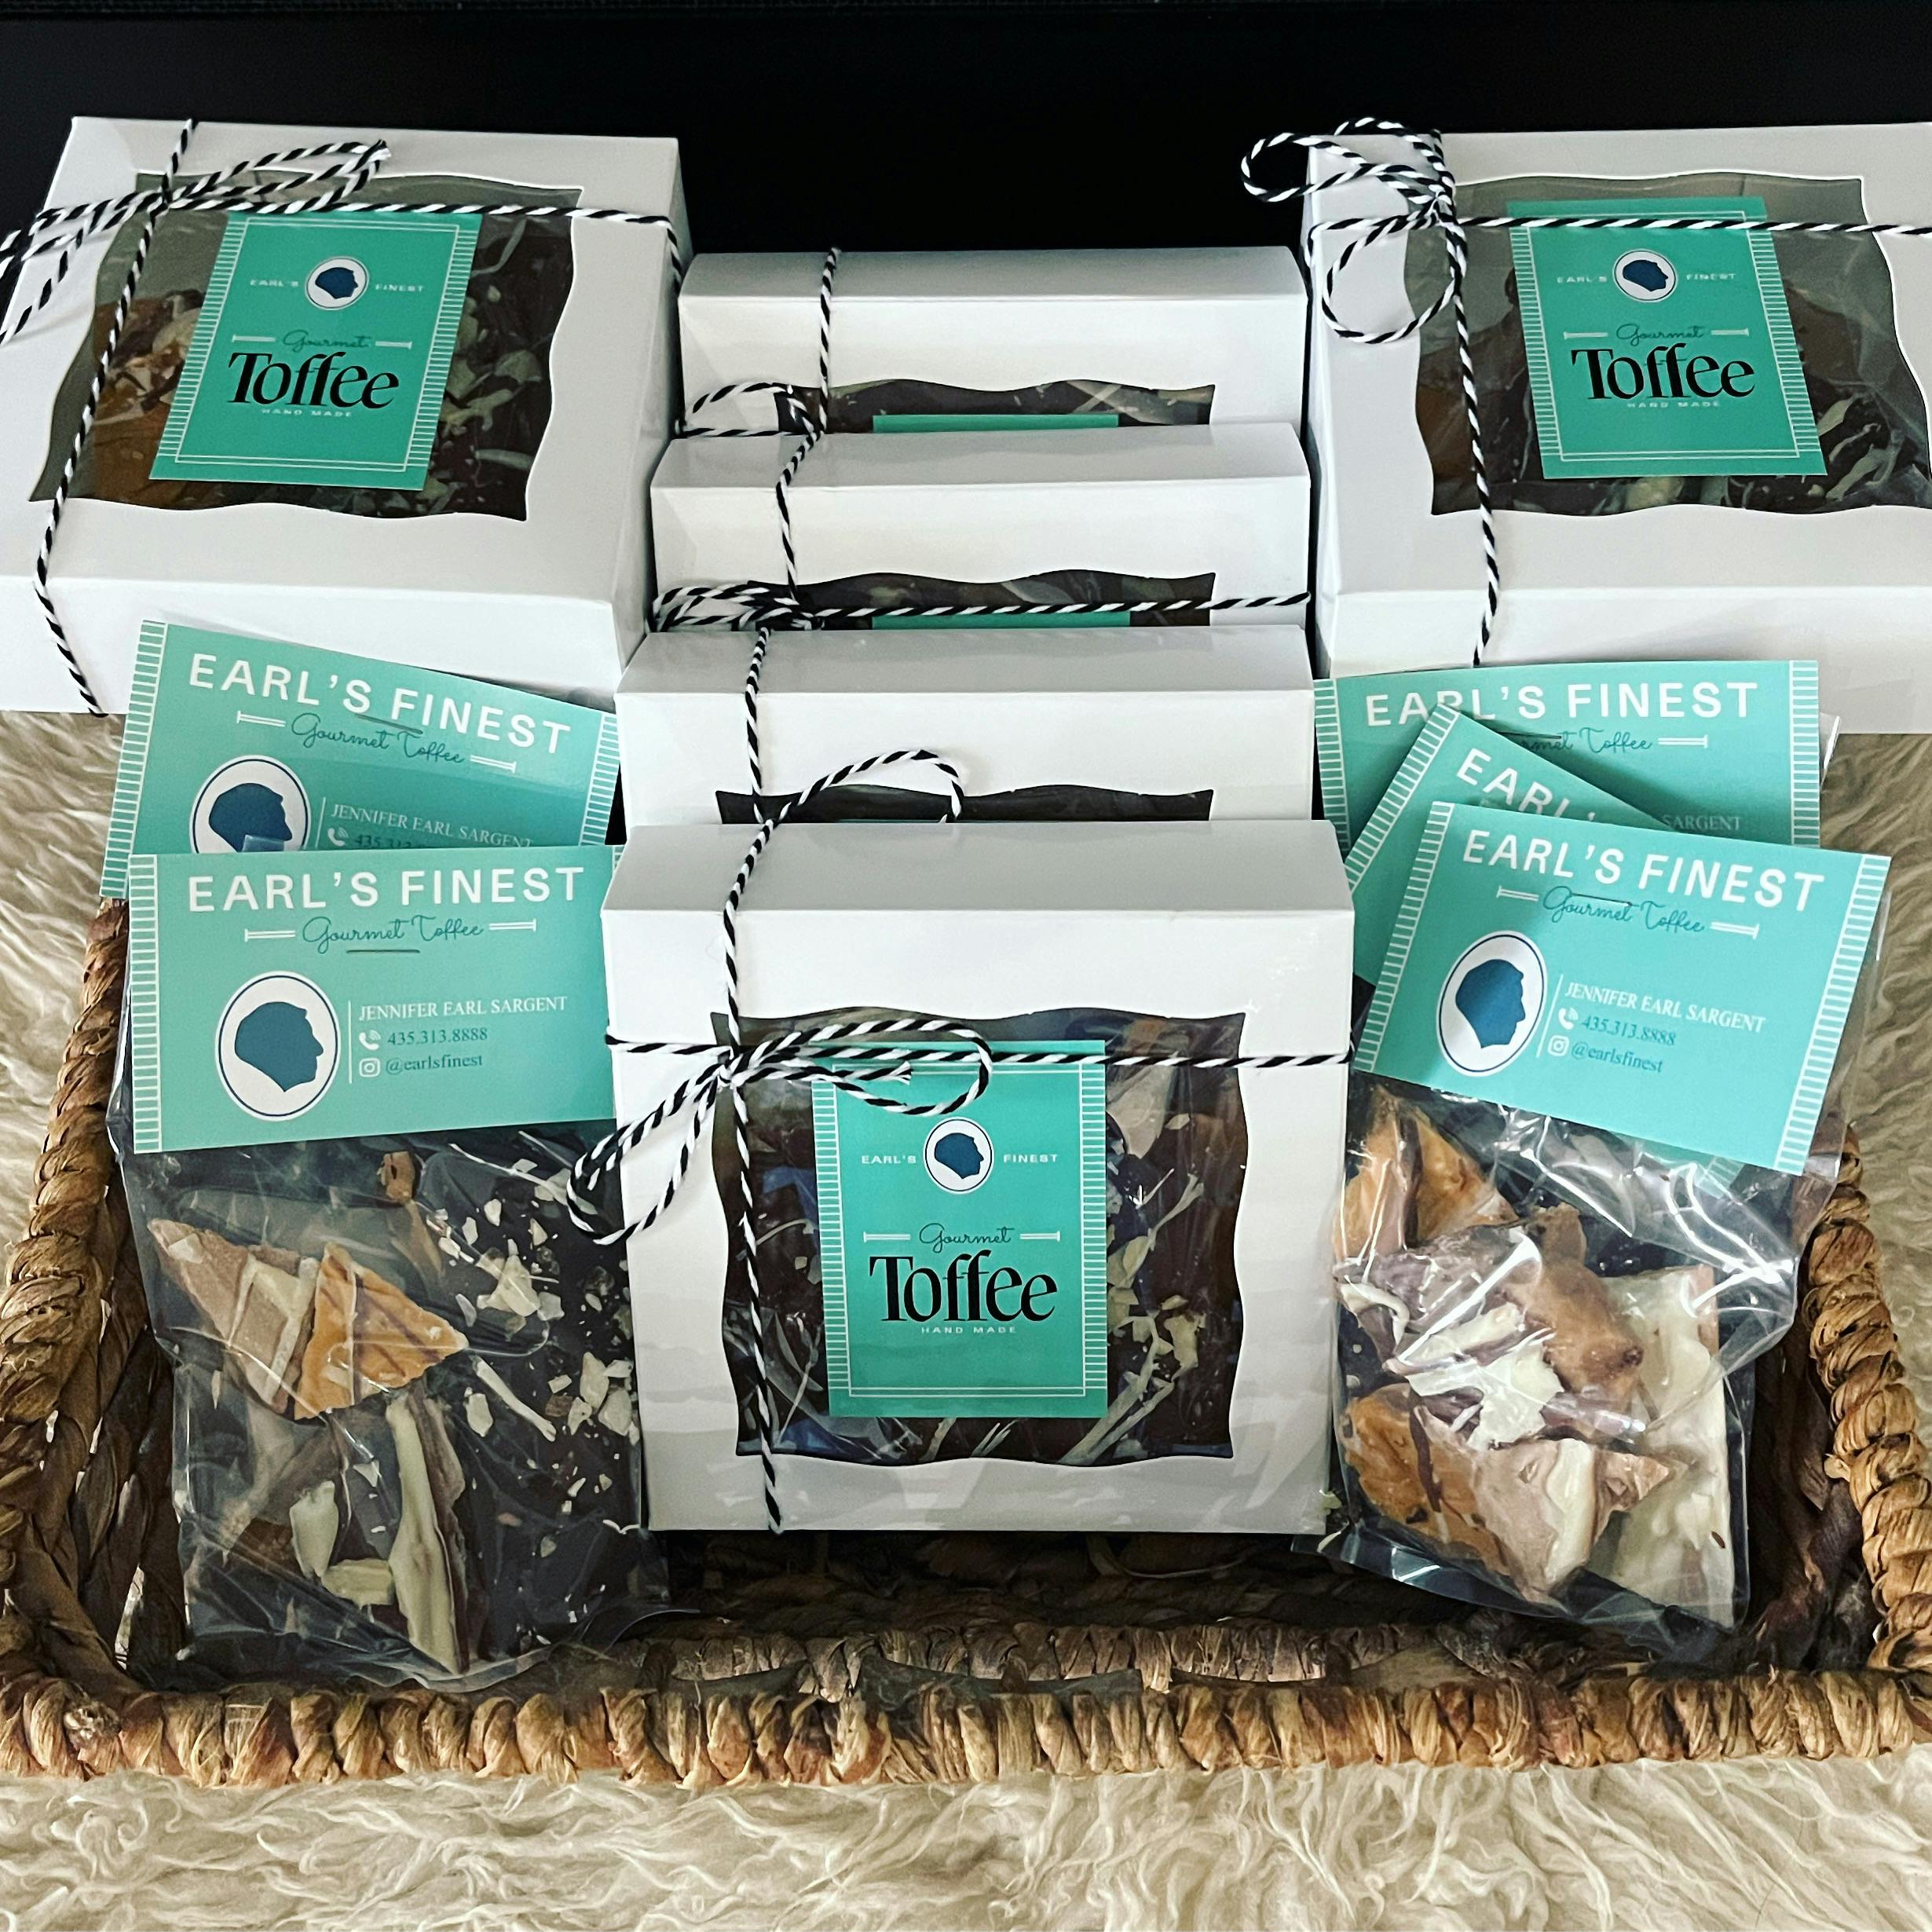 Gourmet toffee for neighbor,client or friend gifts